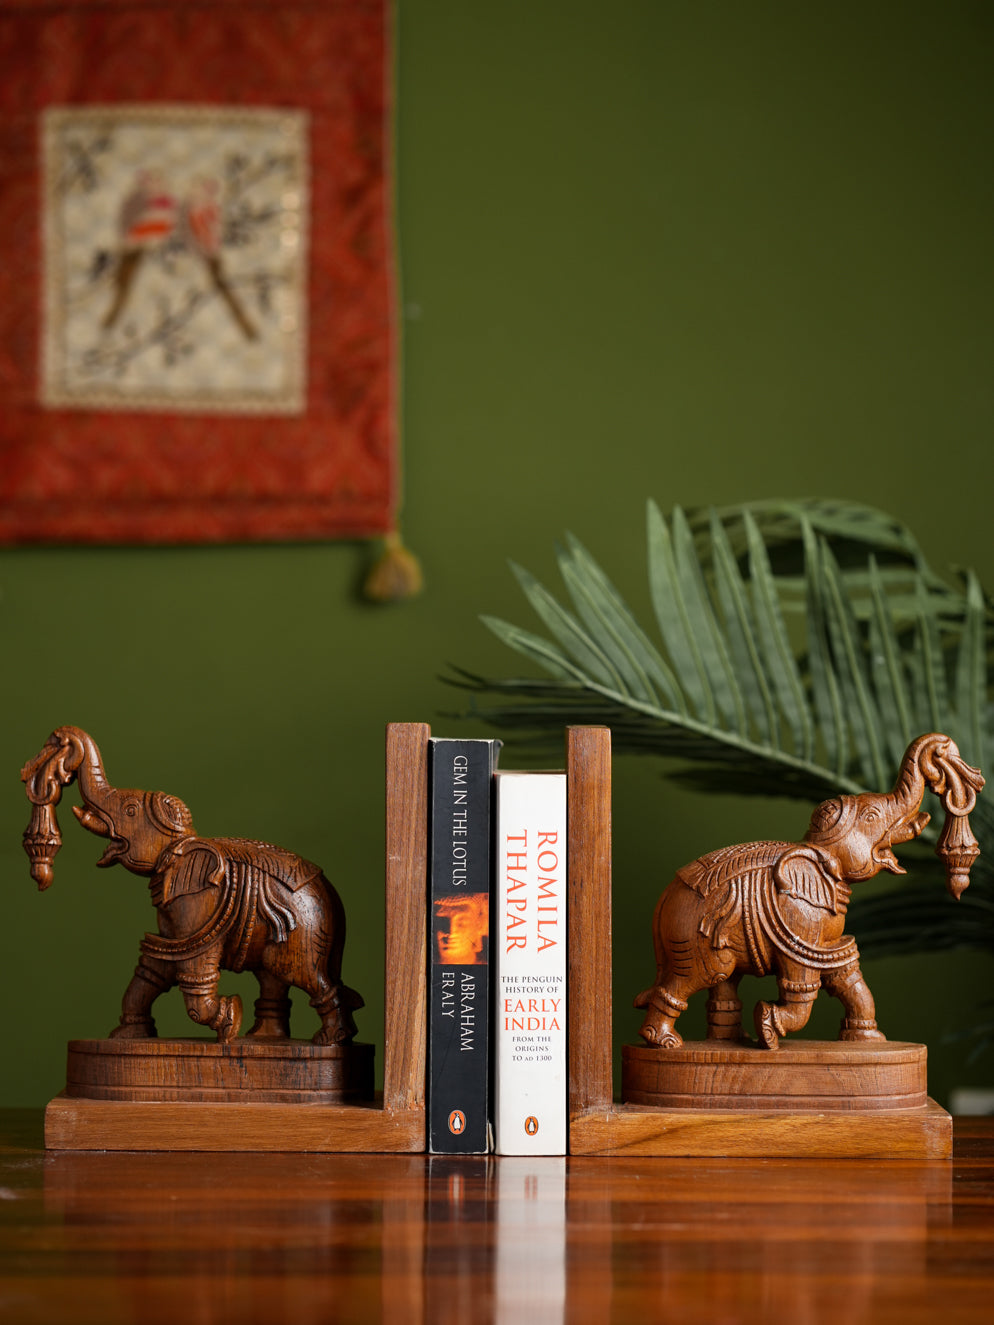 Load image into Gallery viewer, Exclusive Karnataka Wood Carving Book Ends - Elephants (Set of 2)